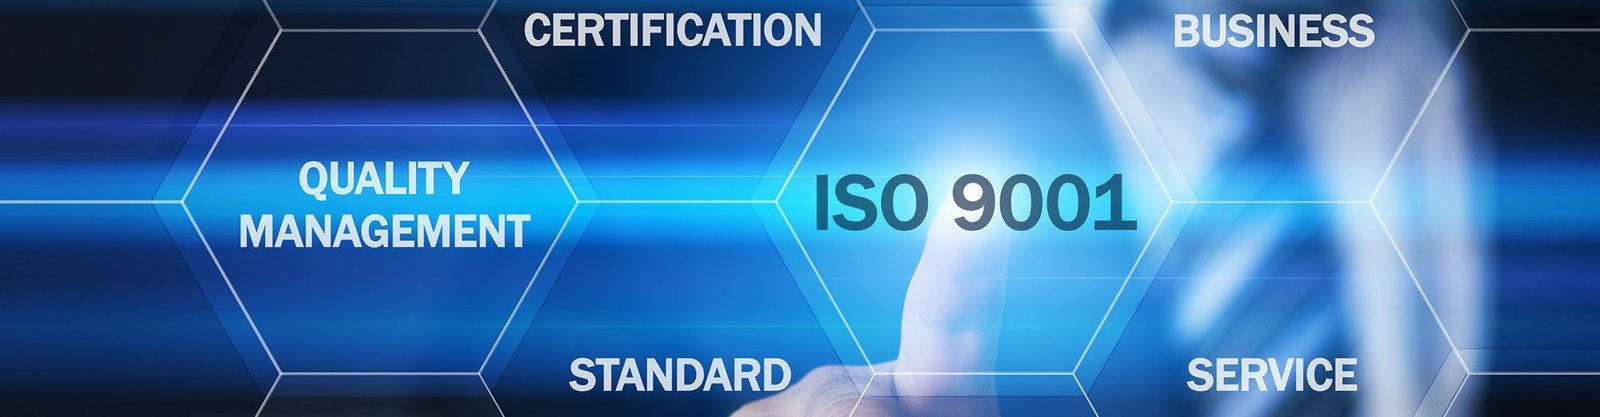 ISO-certificate